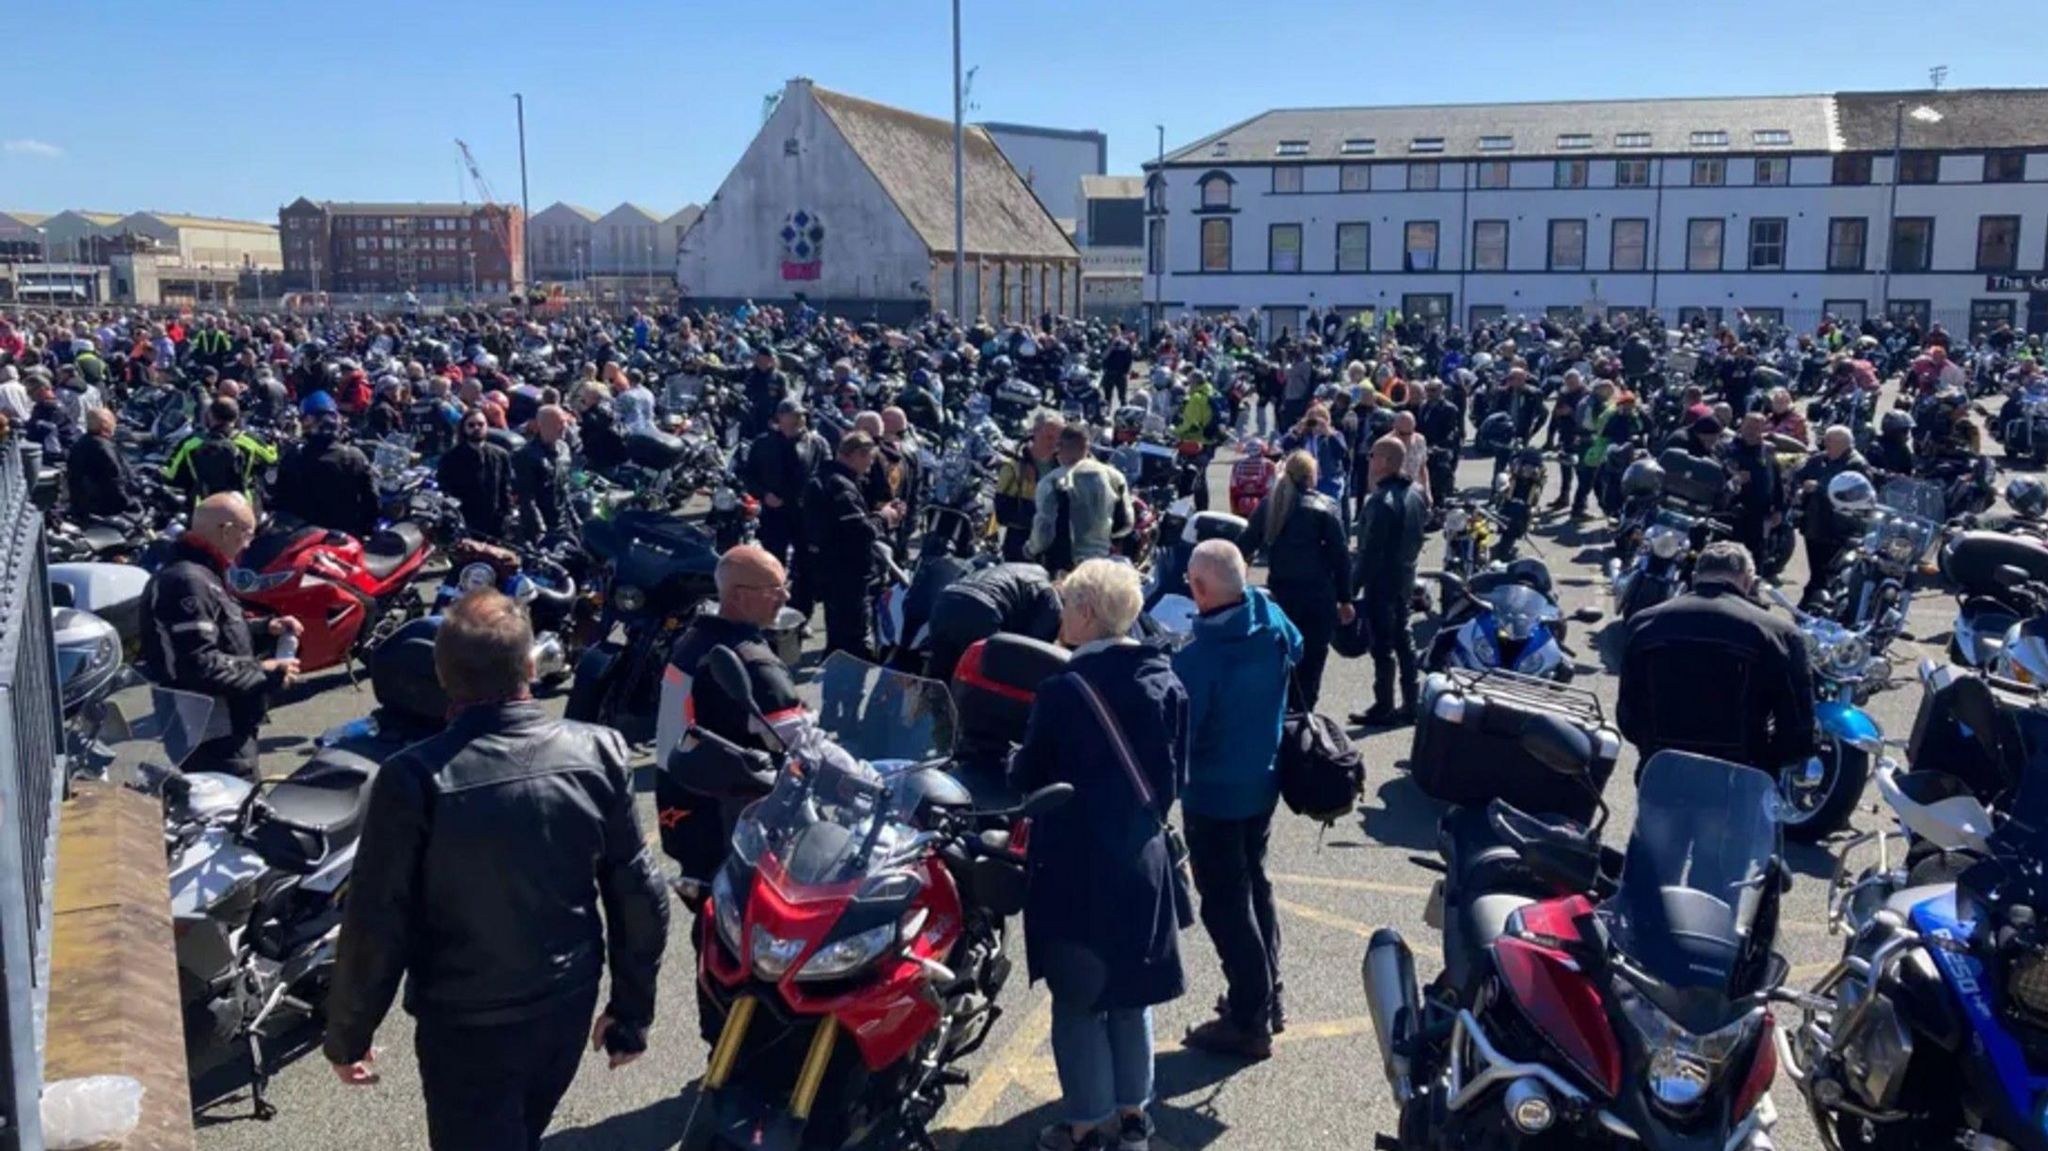 Crowds of the bikers gathered at the end of the ride in Barrow